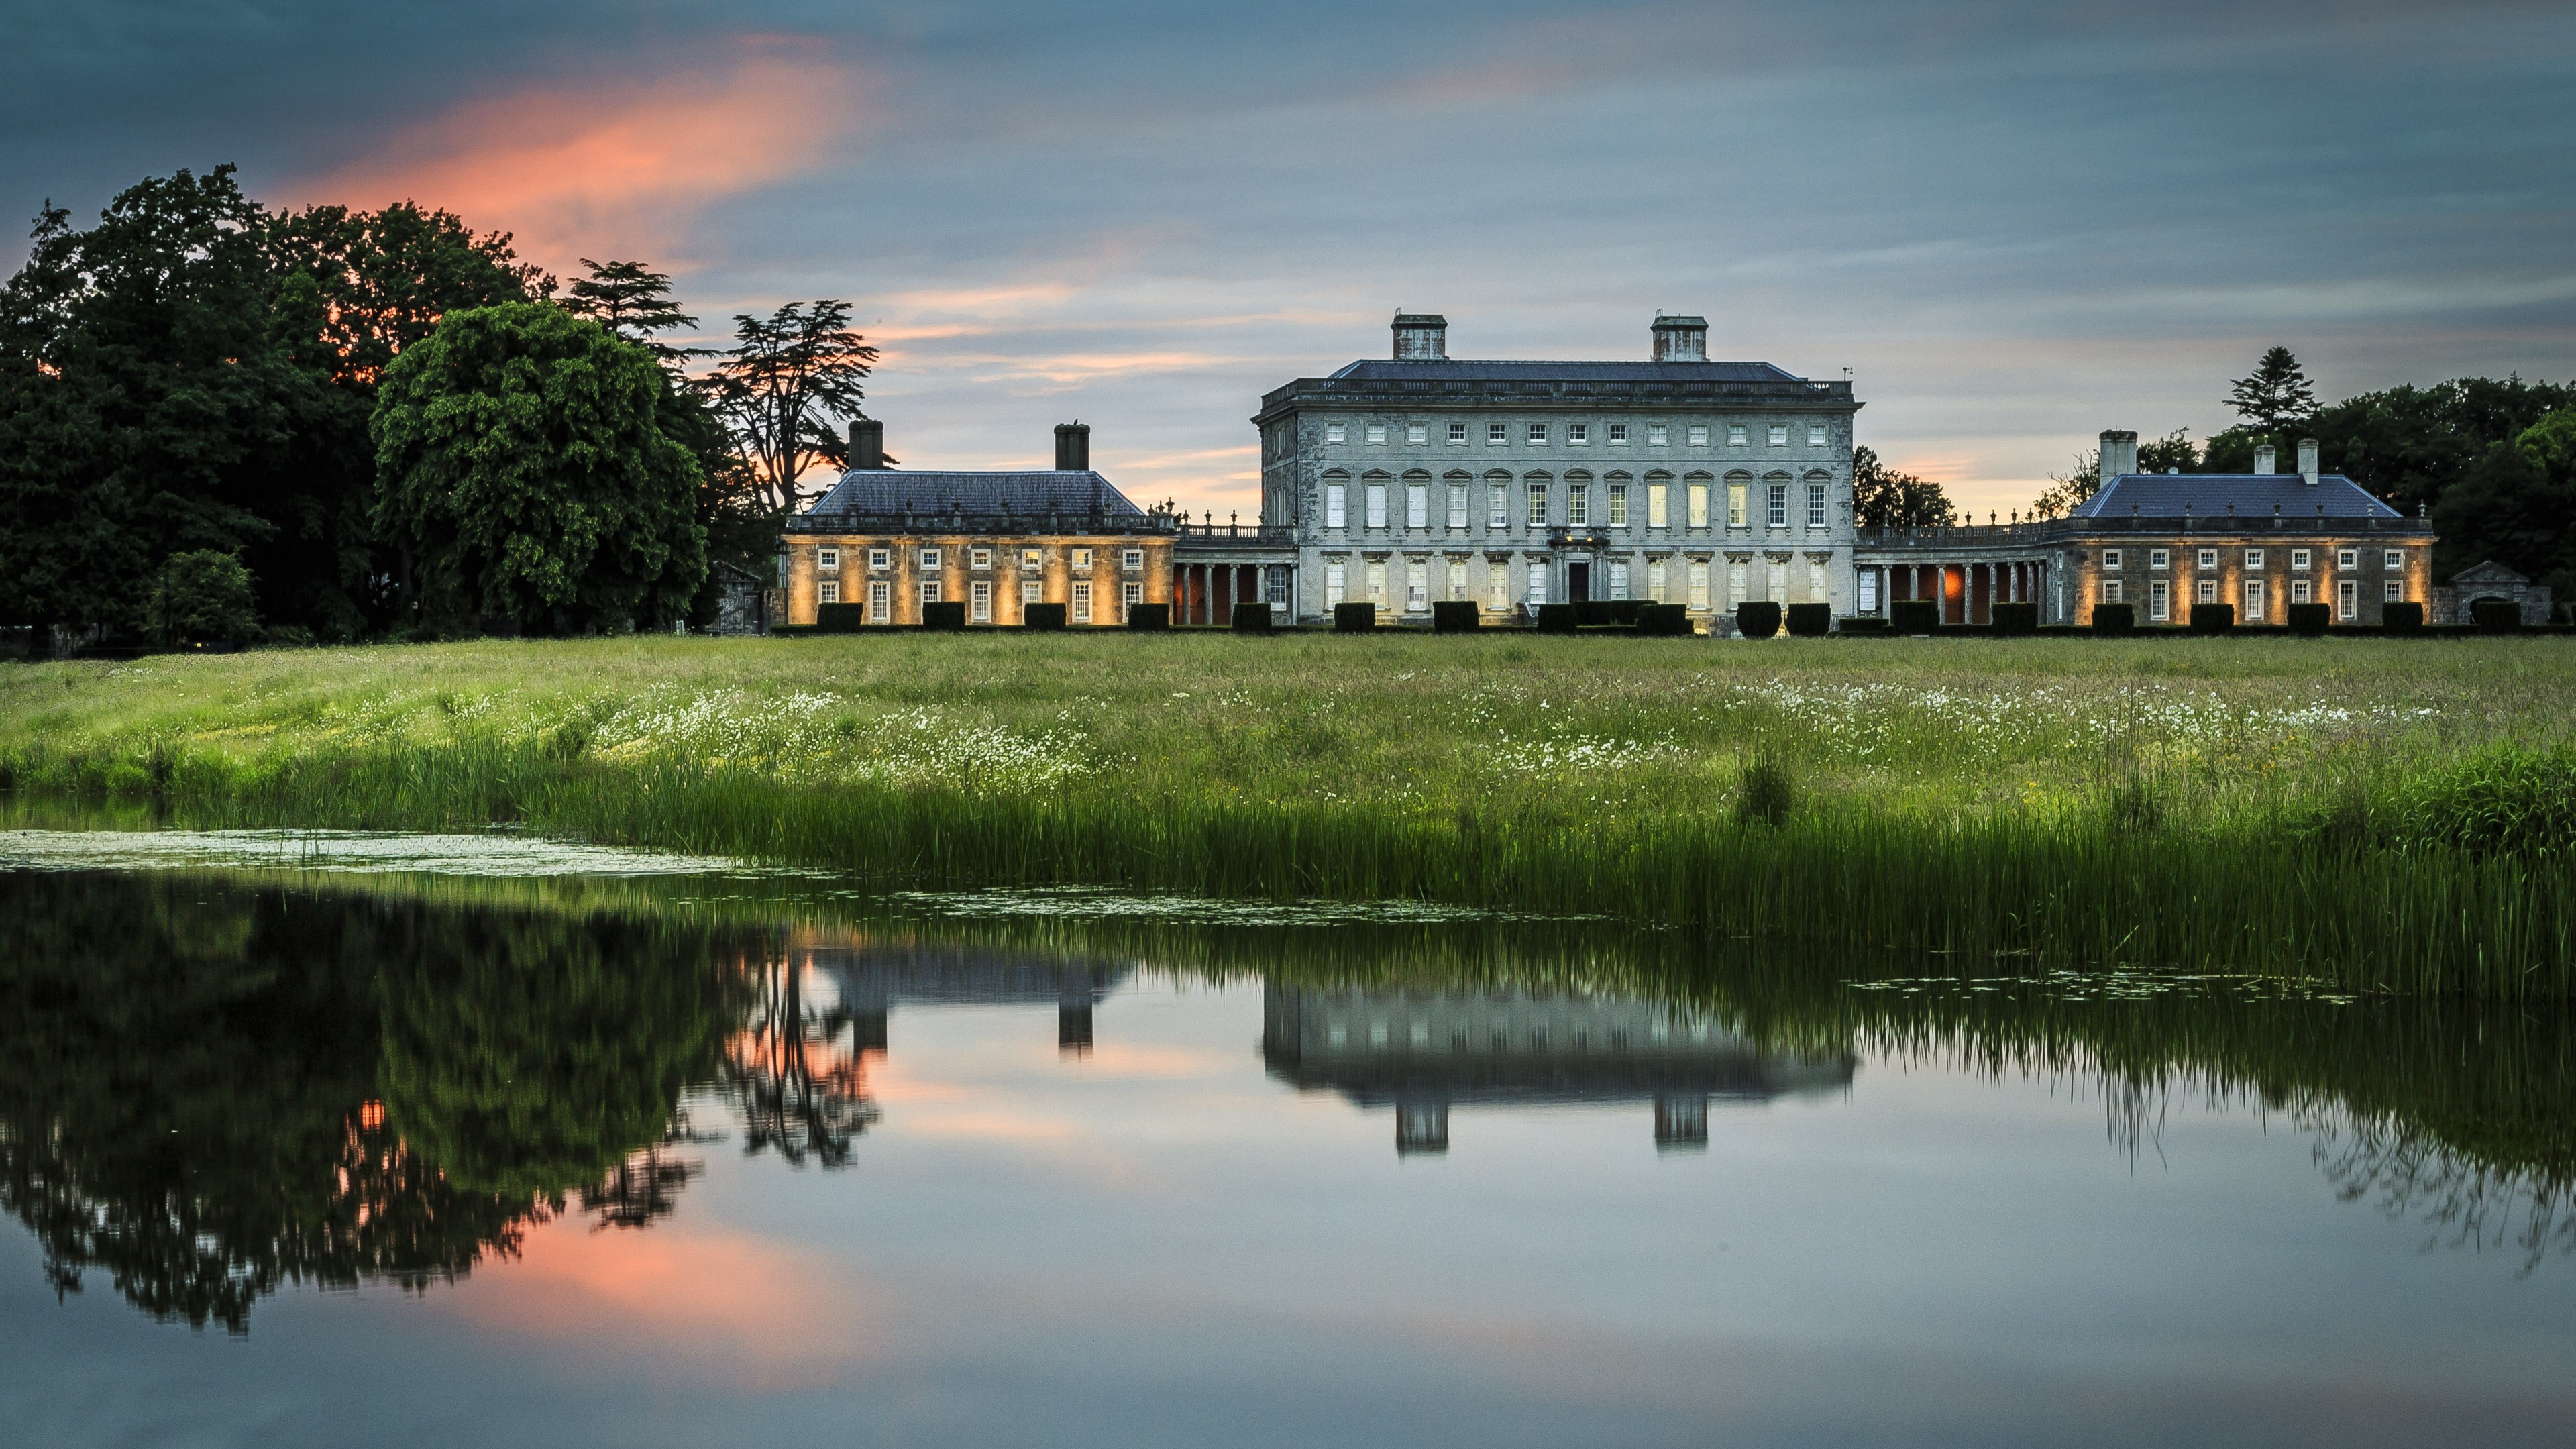 General 3840x2160 architecture building old building water Ireland mansions lake reflection nature landscape sunset field trees